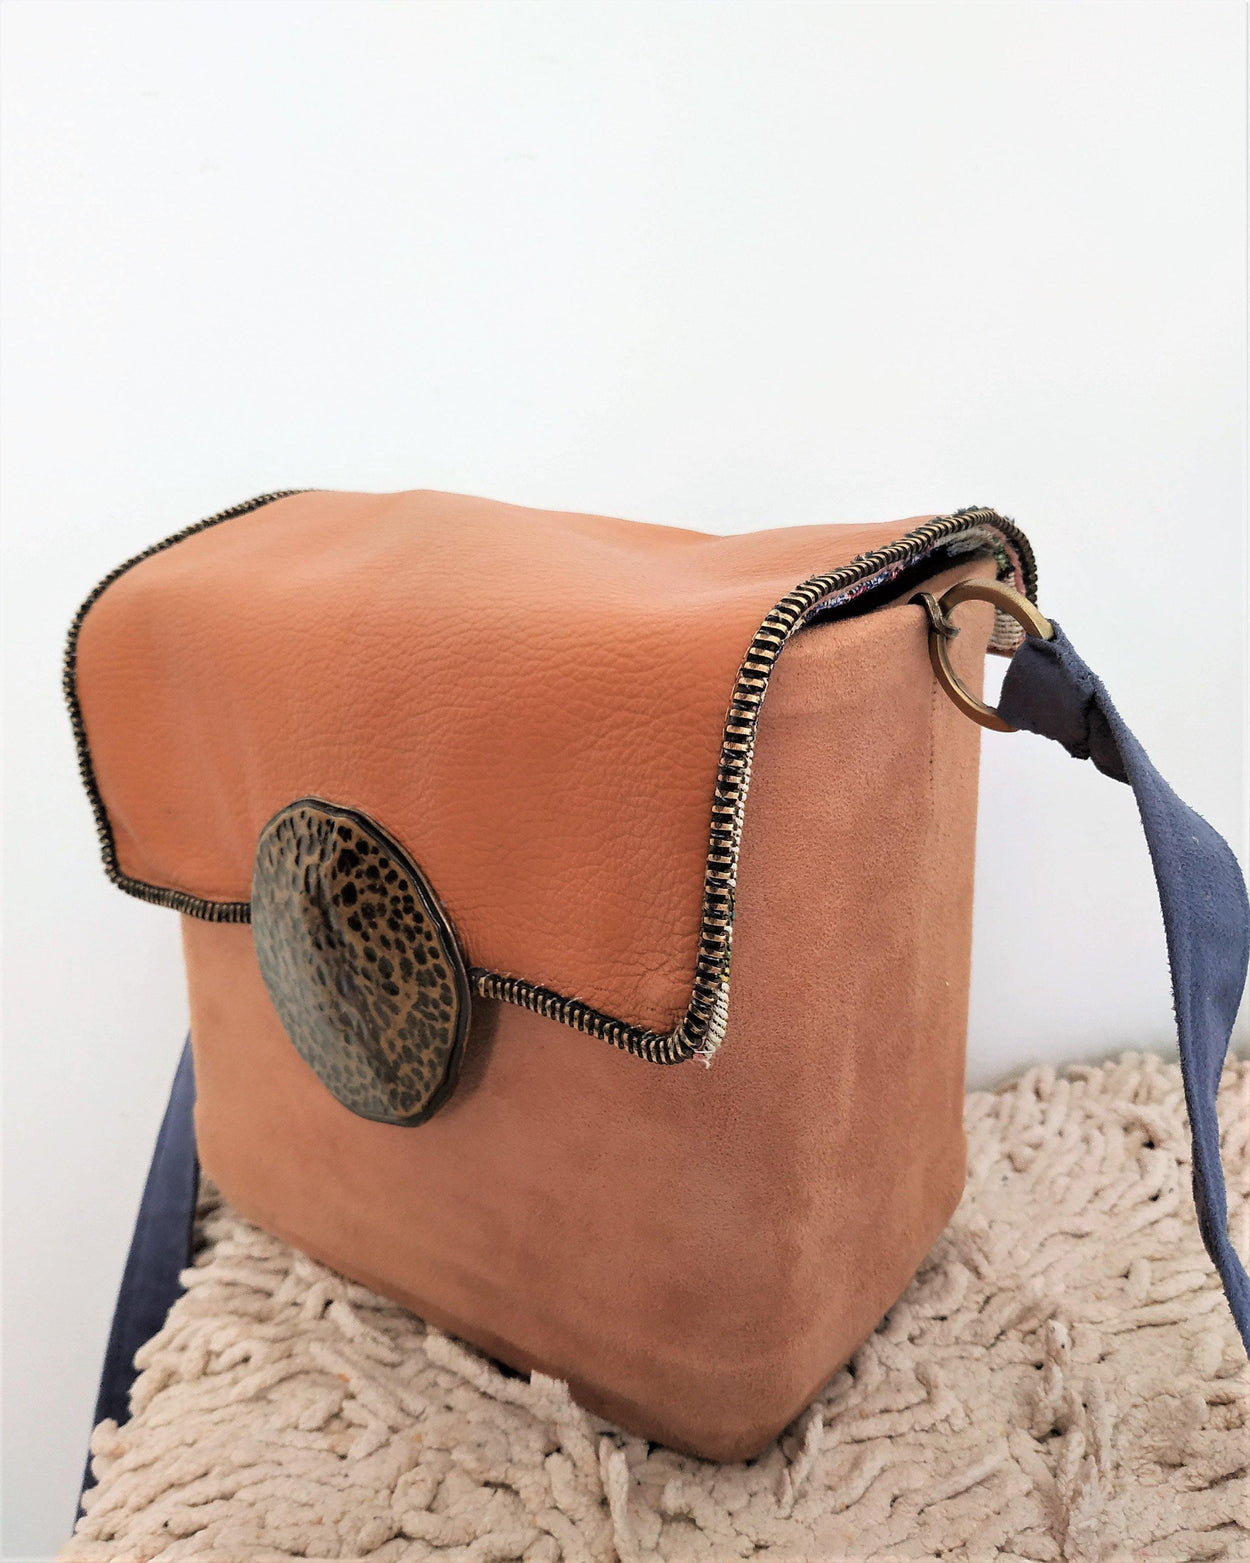 Cube-bag made of artificial suede, tapestry and leather - GLEZANT designer goods store. 